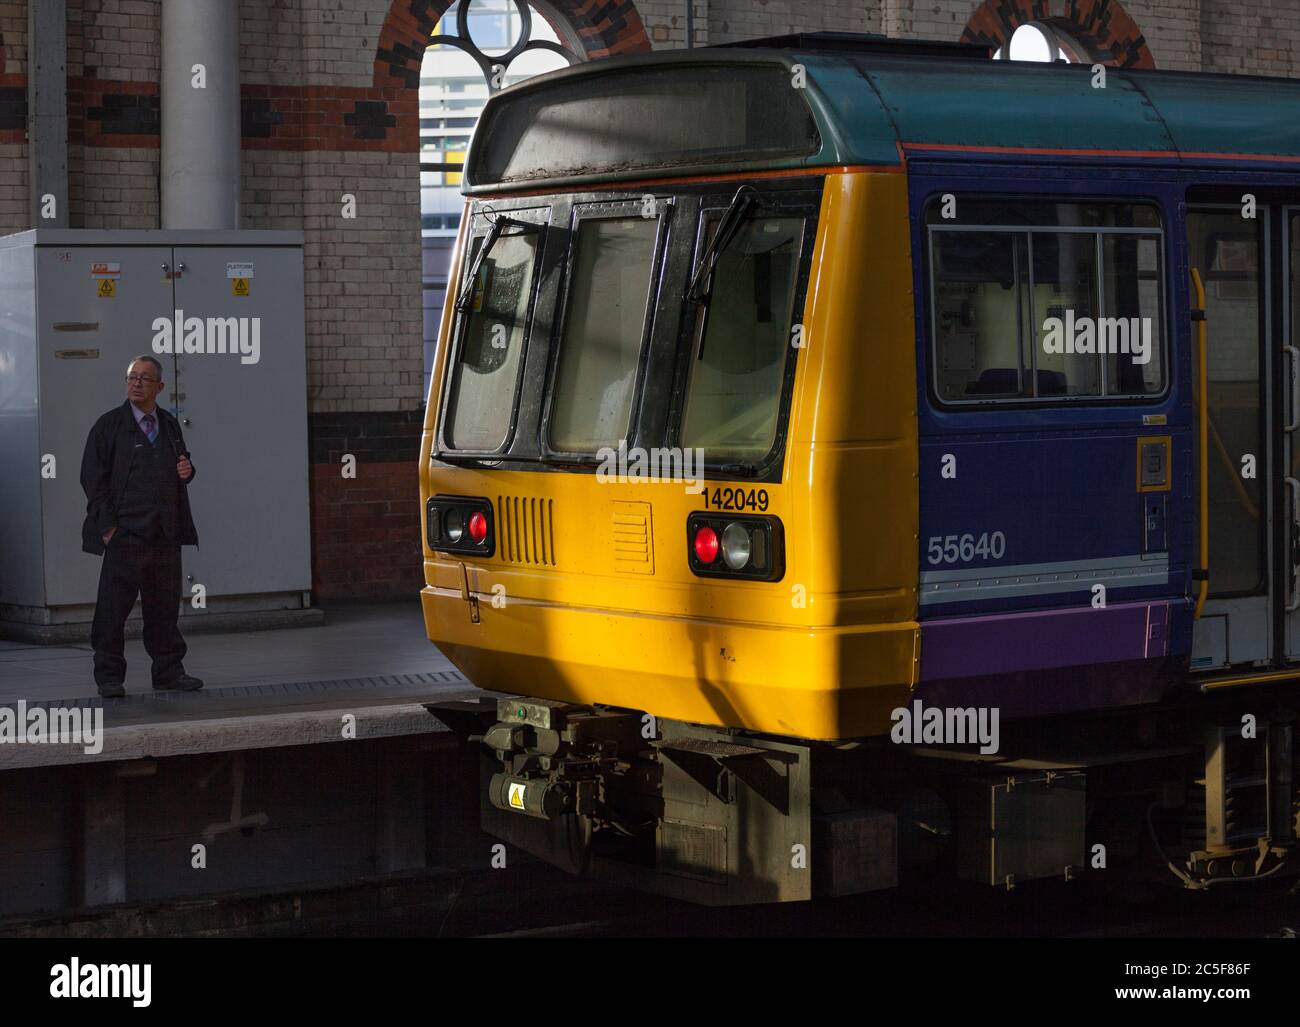 Northern Rail class 142 Pacer train 142049 wartet am Bahnhof Manchester Piccadilly Stockfoto